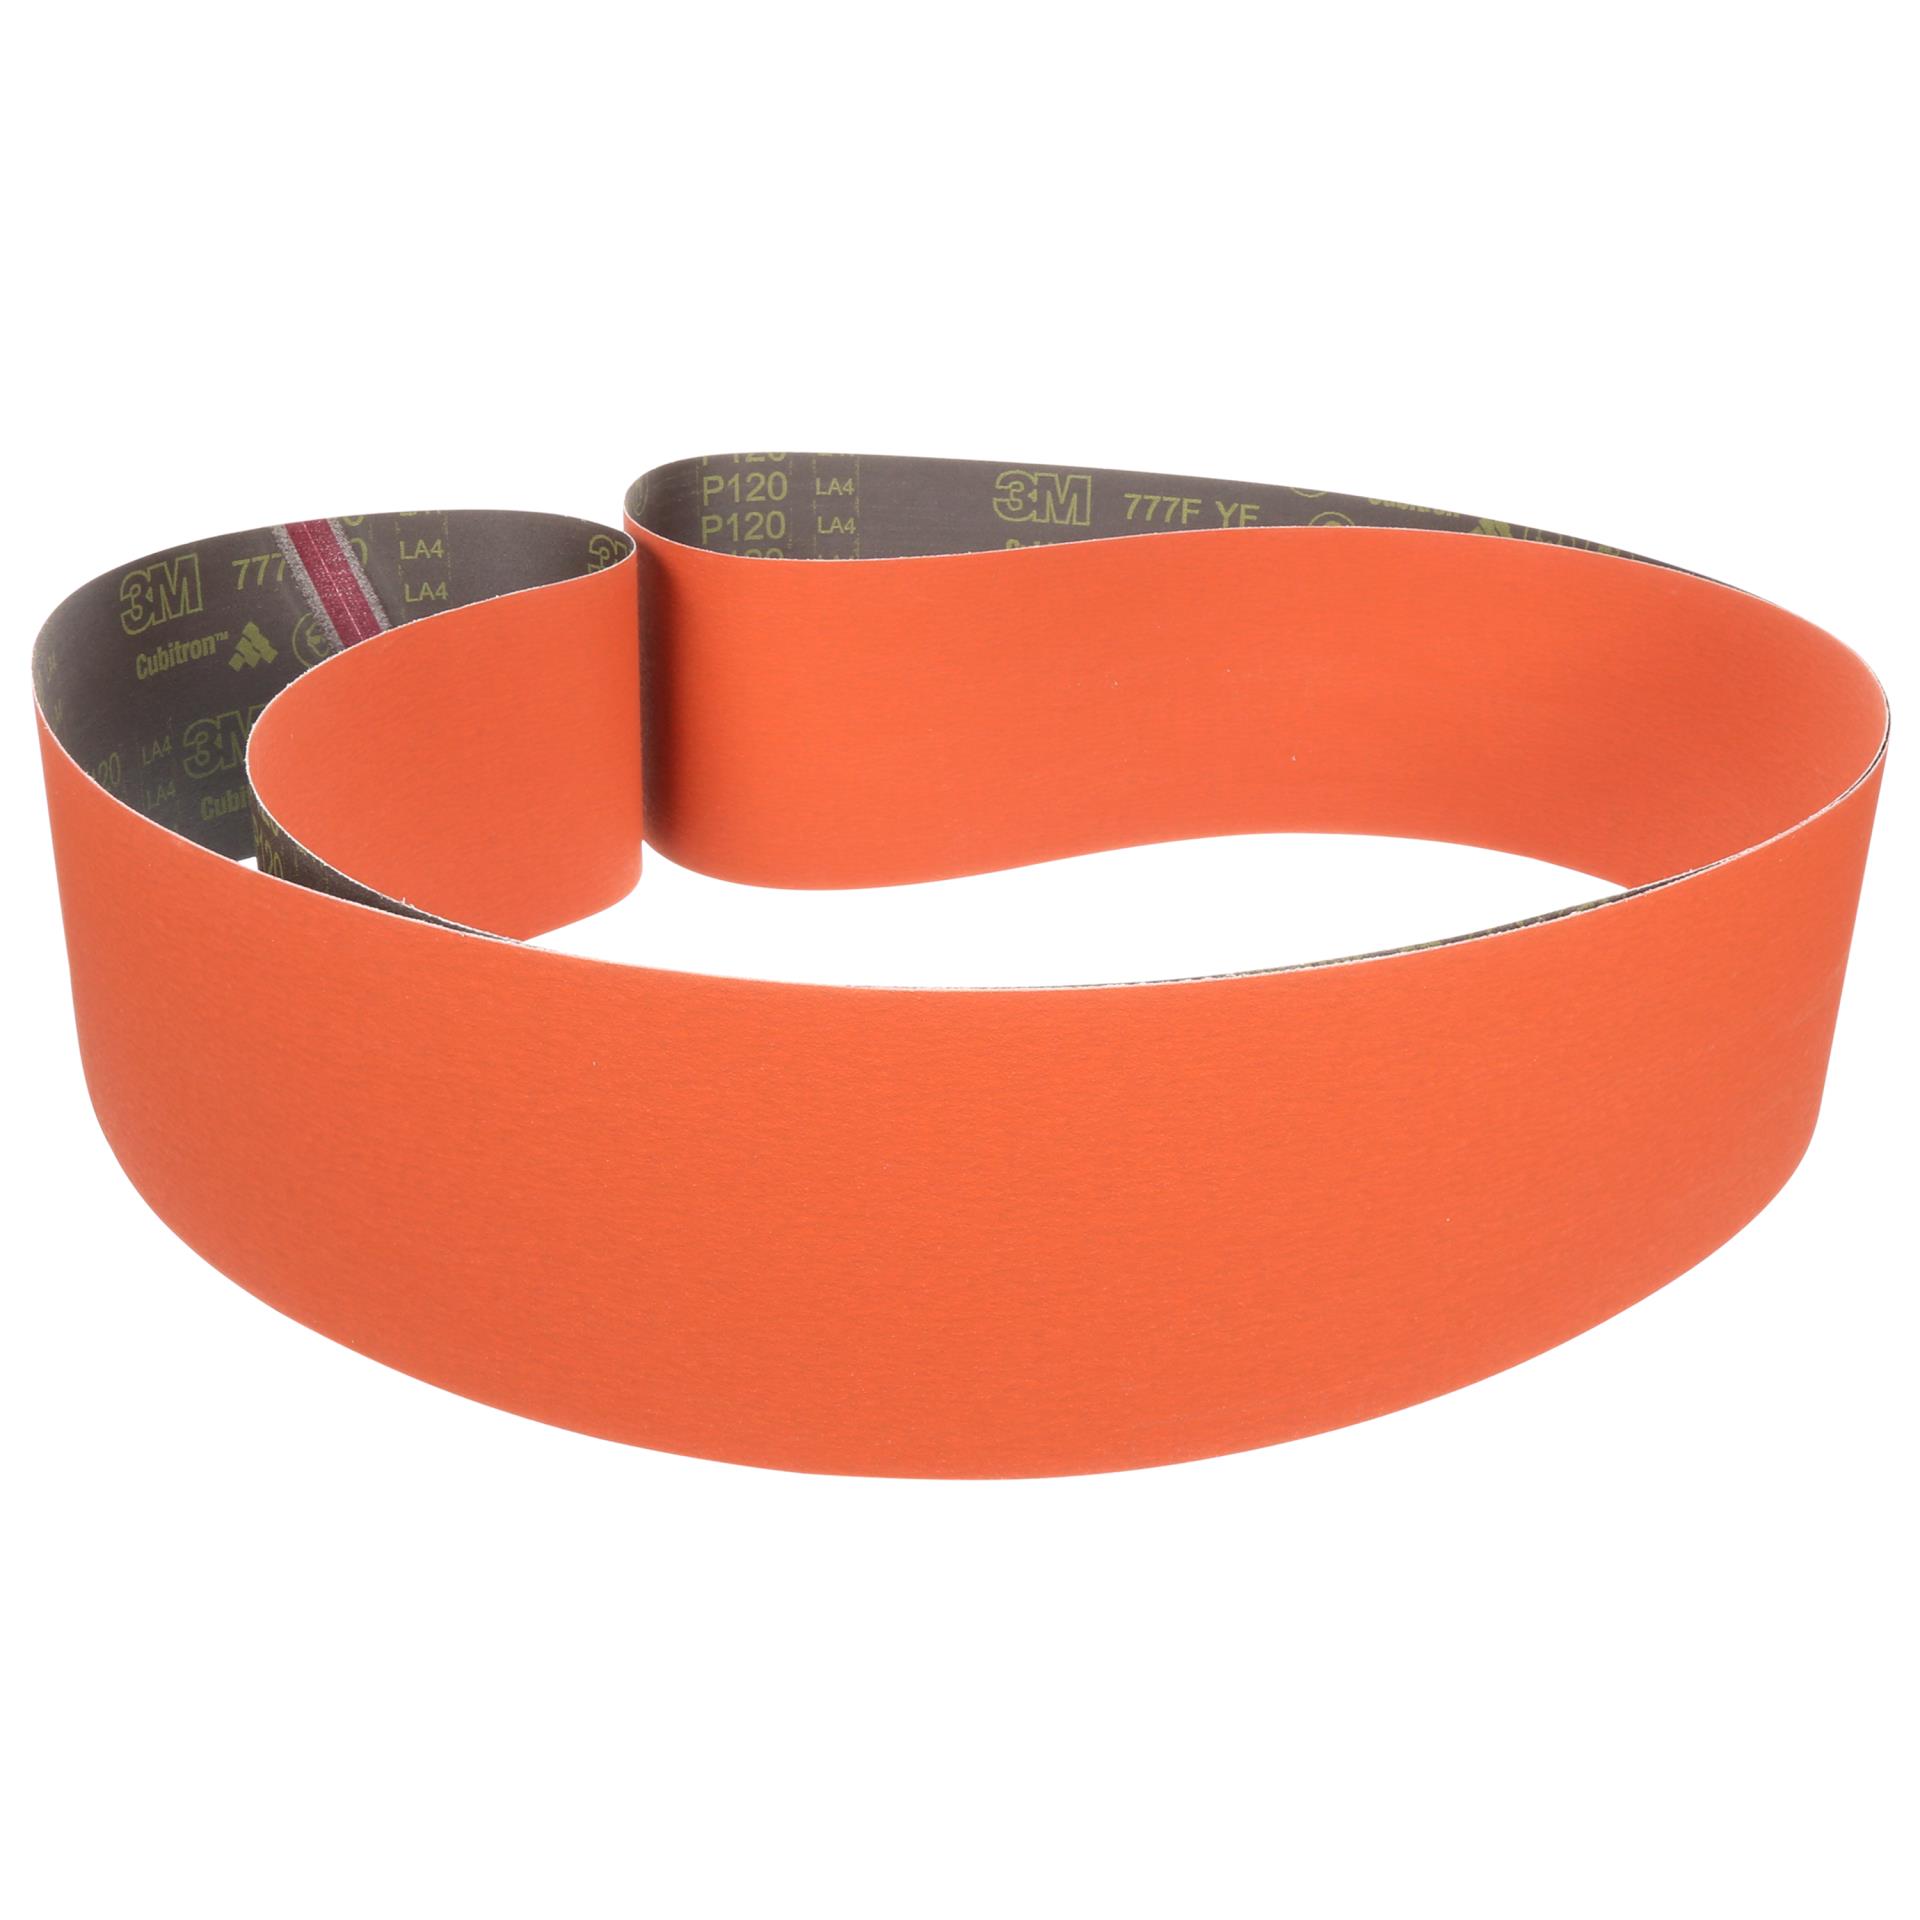 10m x 2.5cm Reflective Conspicuity Tape Strip Safety Coat Safe Armband Warning 